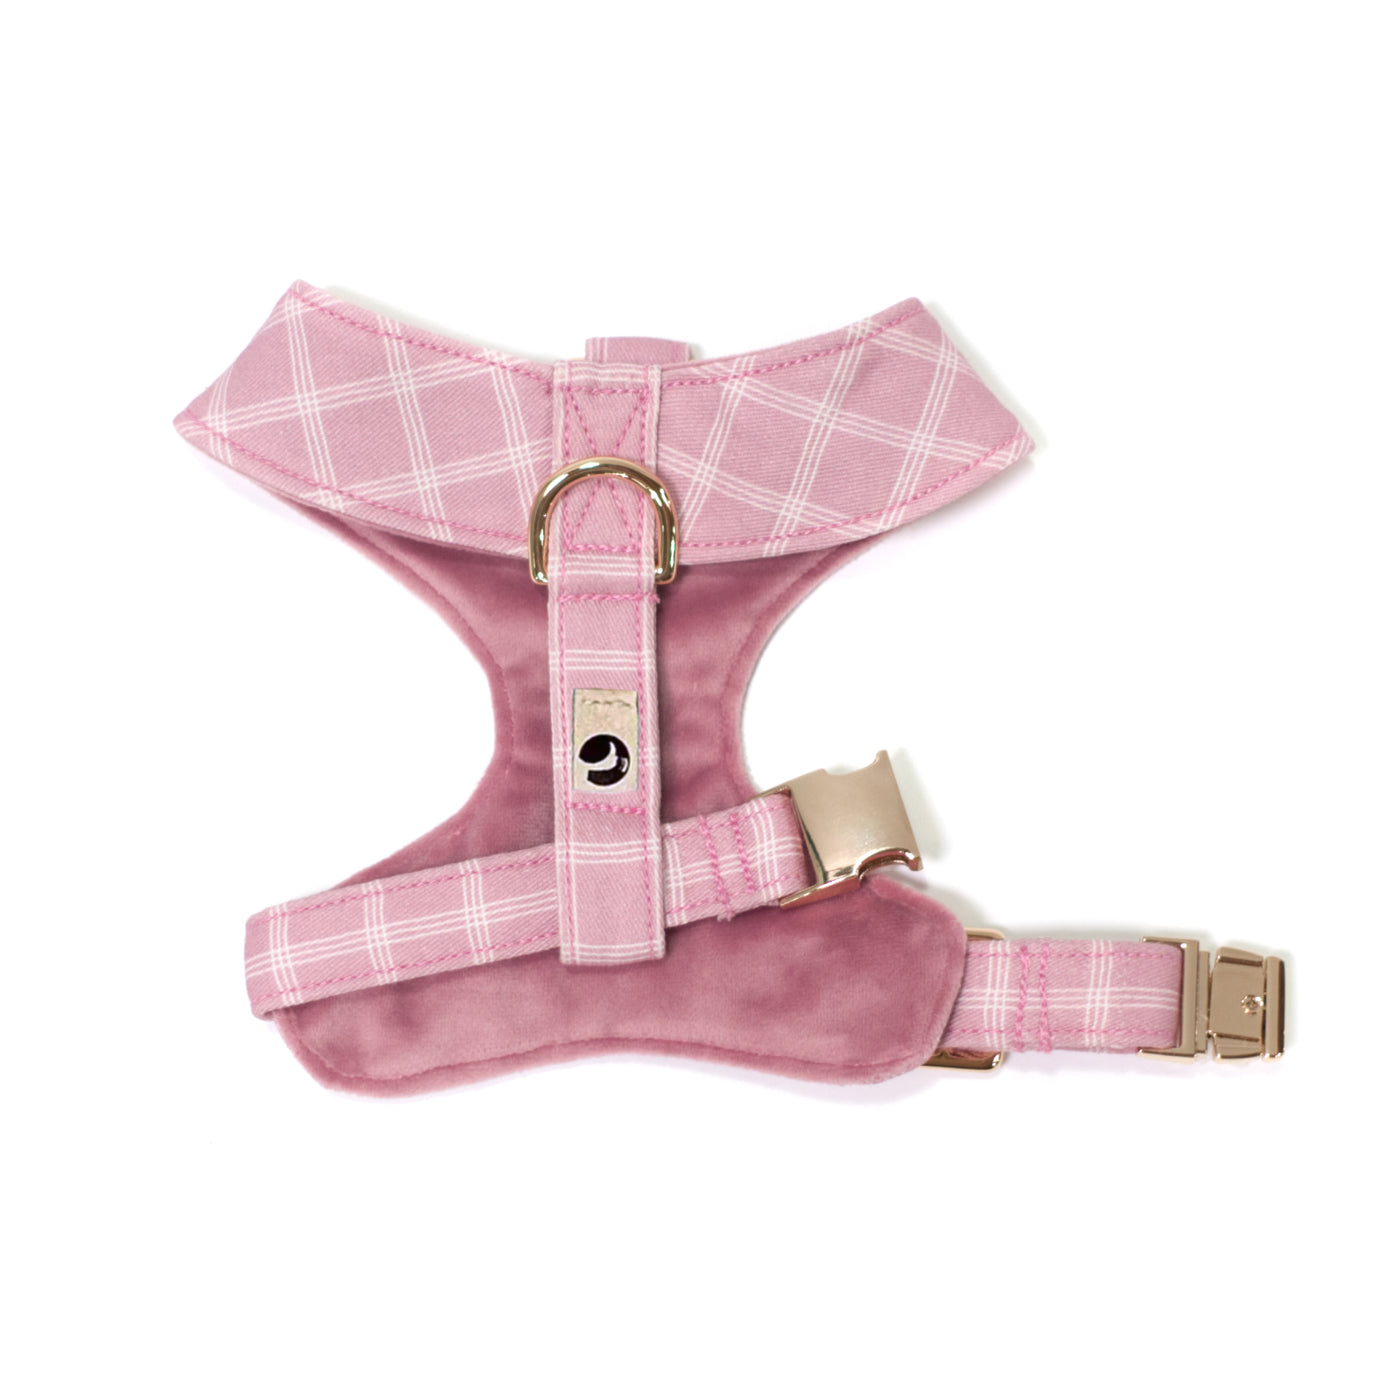 Size XS reversible dog harness in pink velvet and plaid with gold buckles